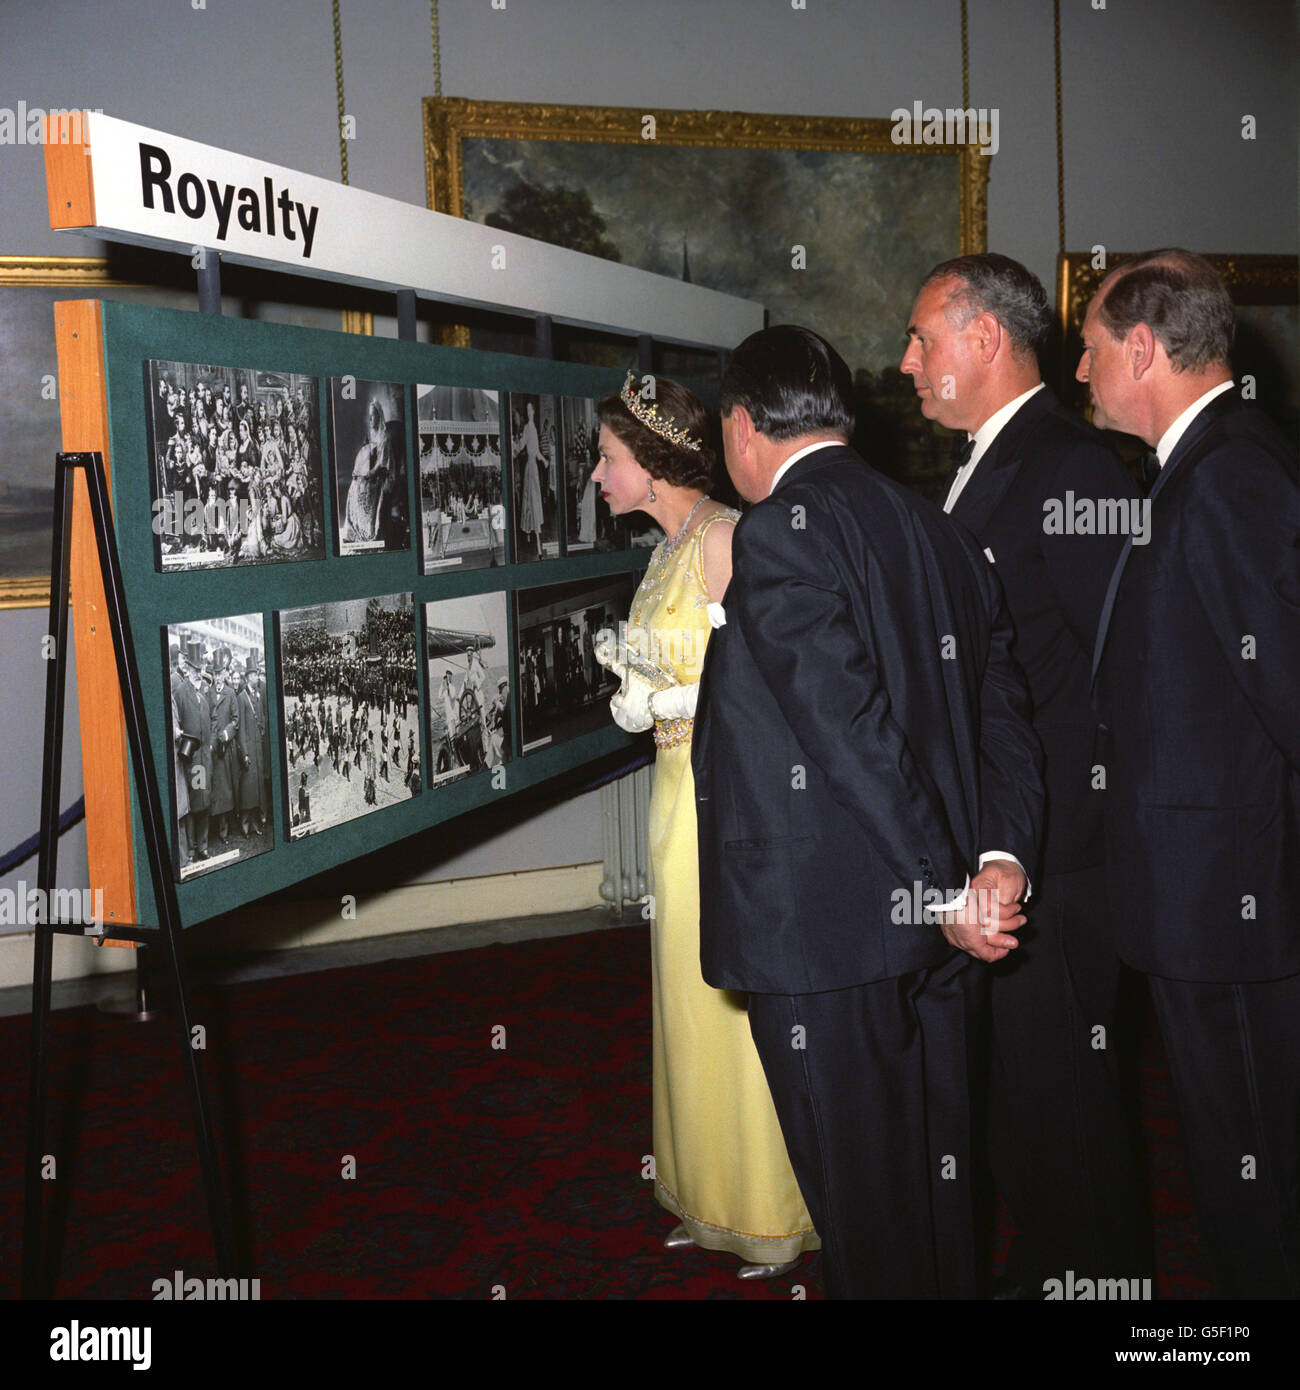 The Queen looks at a collection of Royal images from the Press Association during a reception in Guildhall, London, marking the centenary of the Press Association, Britain's national news agency. With the Queen is the Chairman of the Press Association Mr W.D. Barnetson. Stock Photo